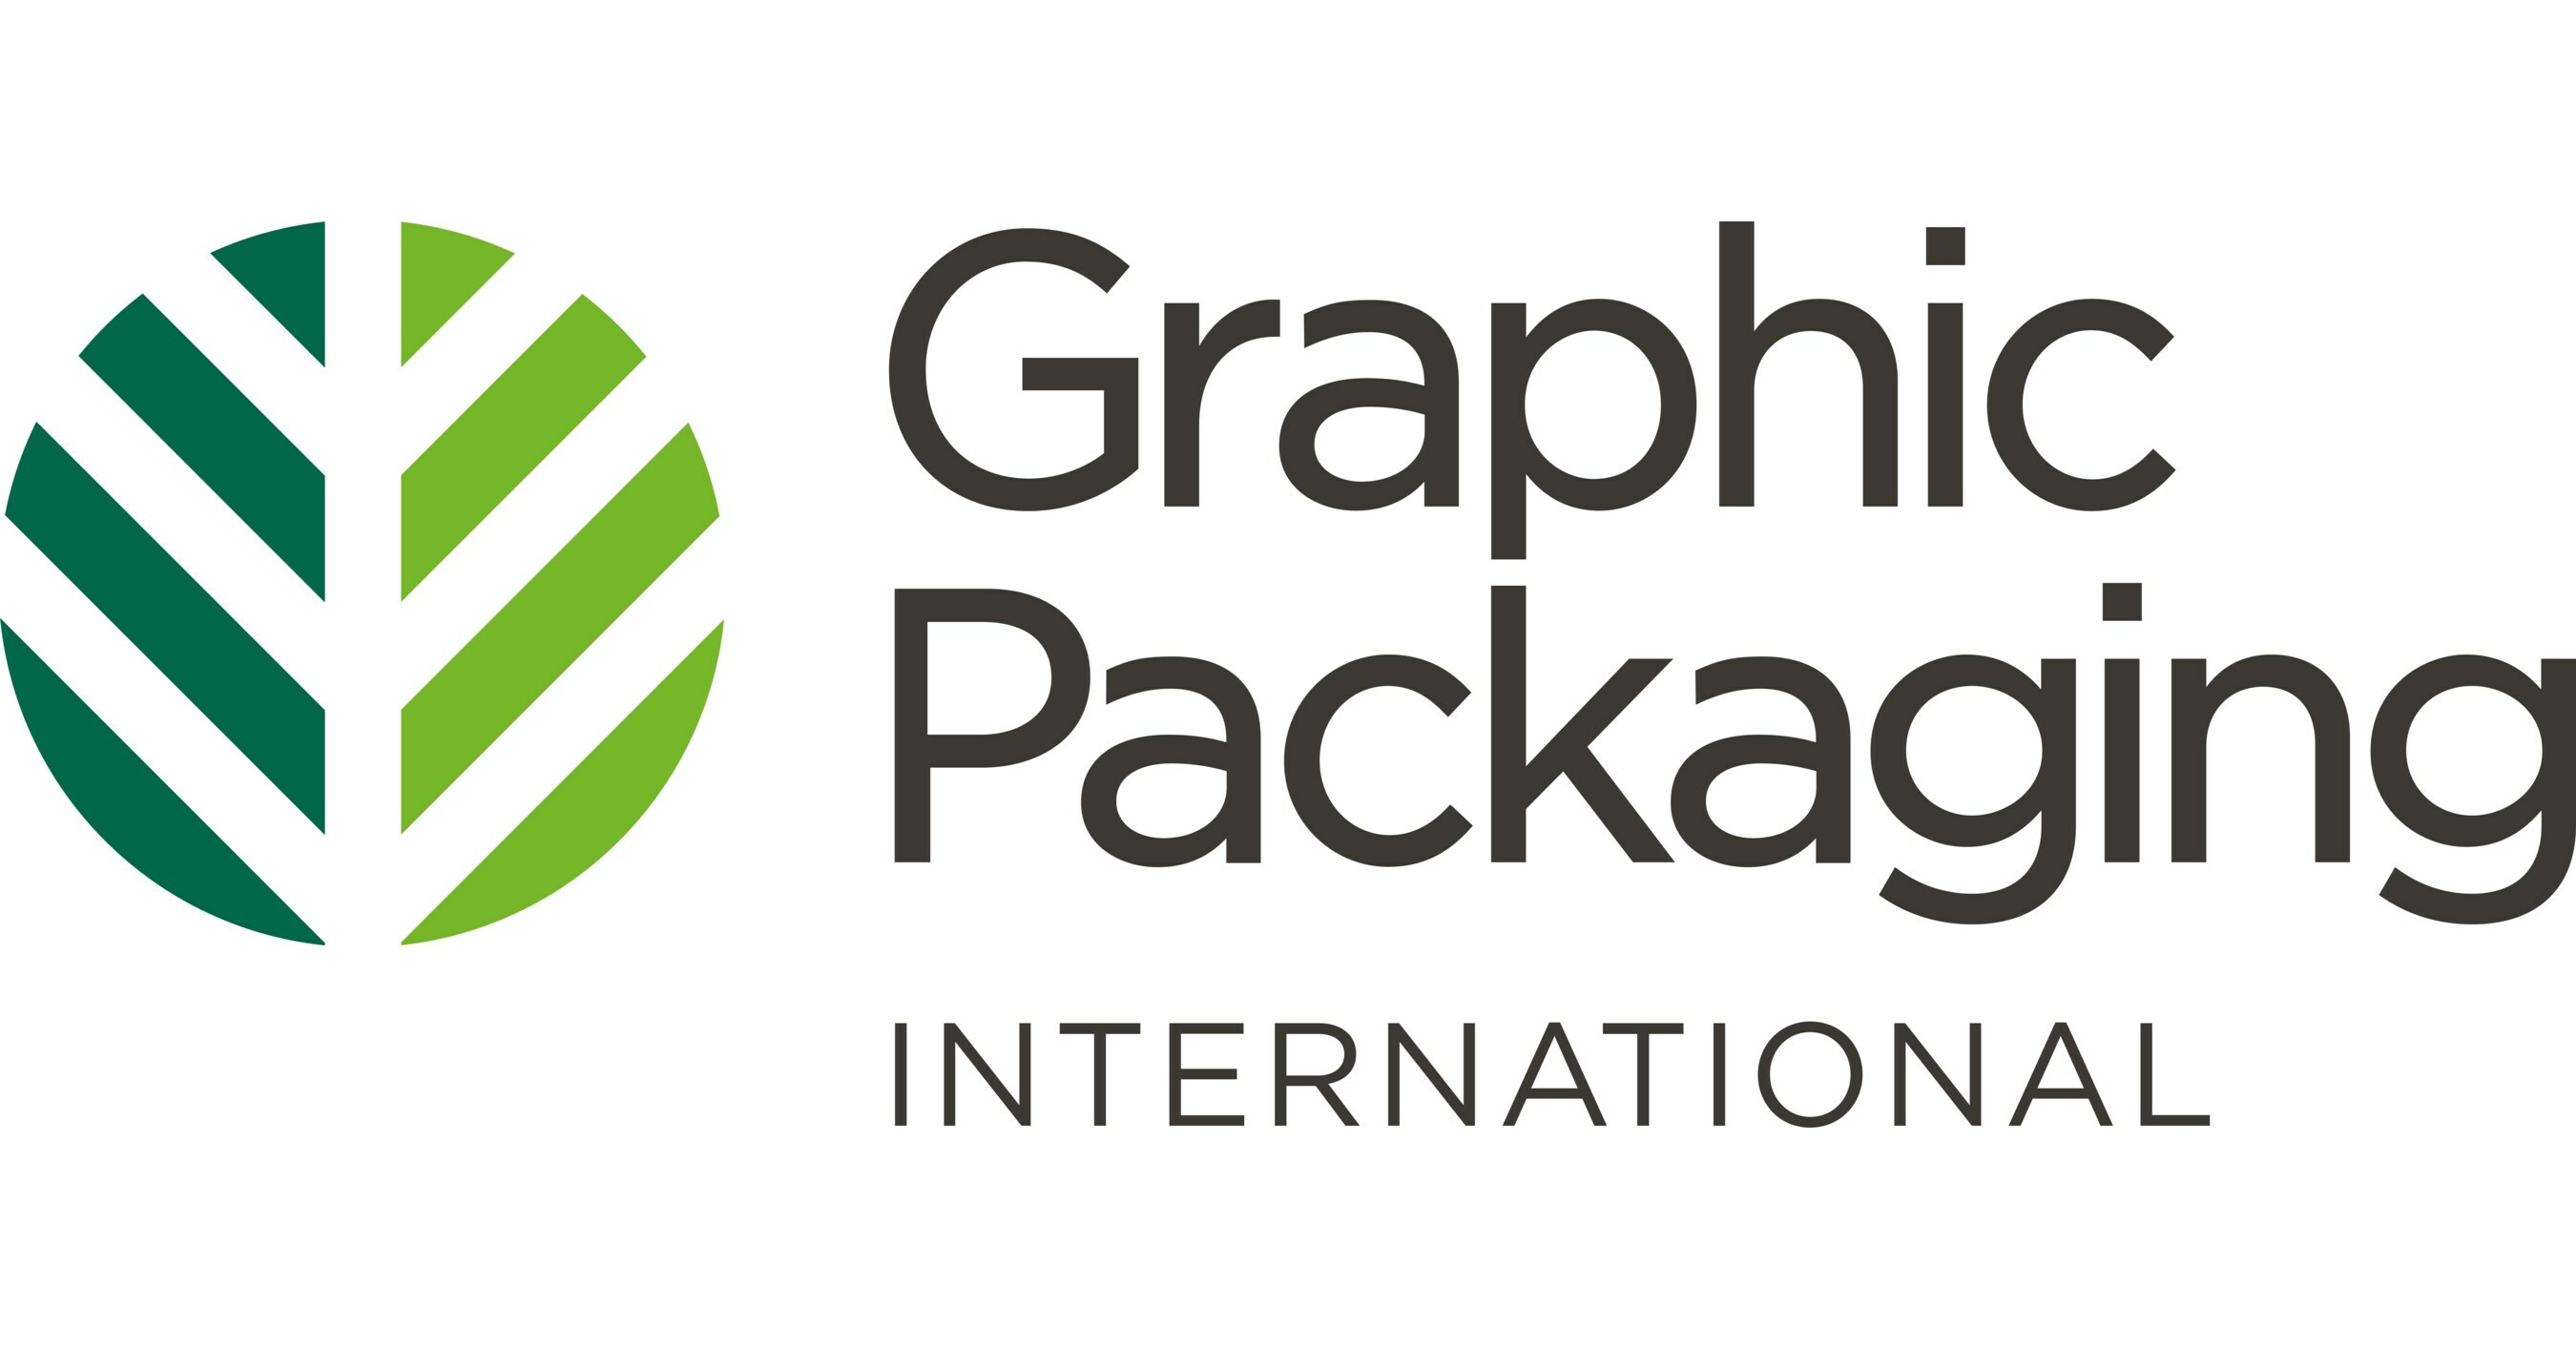 Graphic Packaging Holding Company Reports Strong Fourth Quarter and Full Year 2022 Results; Strengthening Leadership in Fiber-Based Consumer Packaging with New Coated Recycled Paperboard Mill Investment